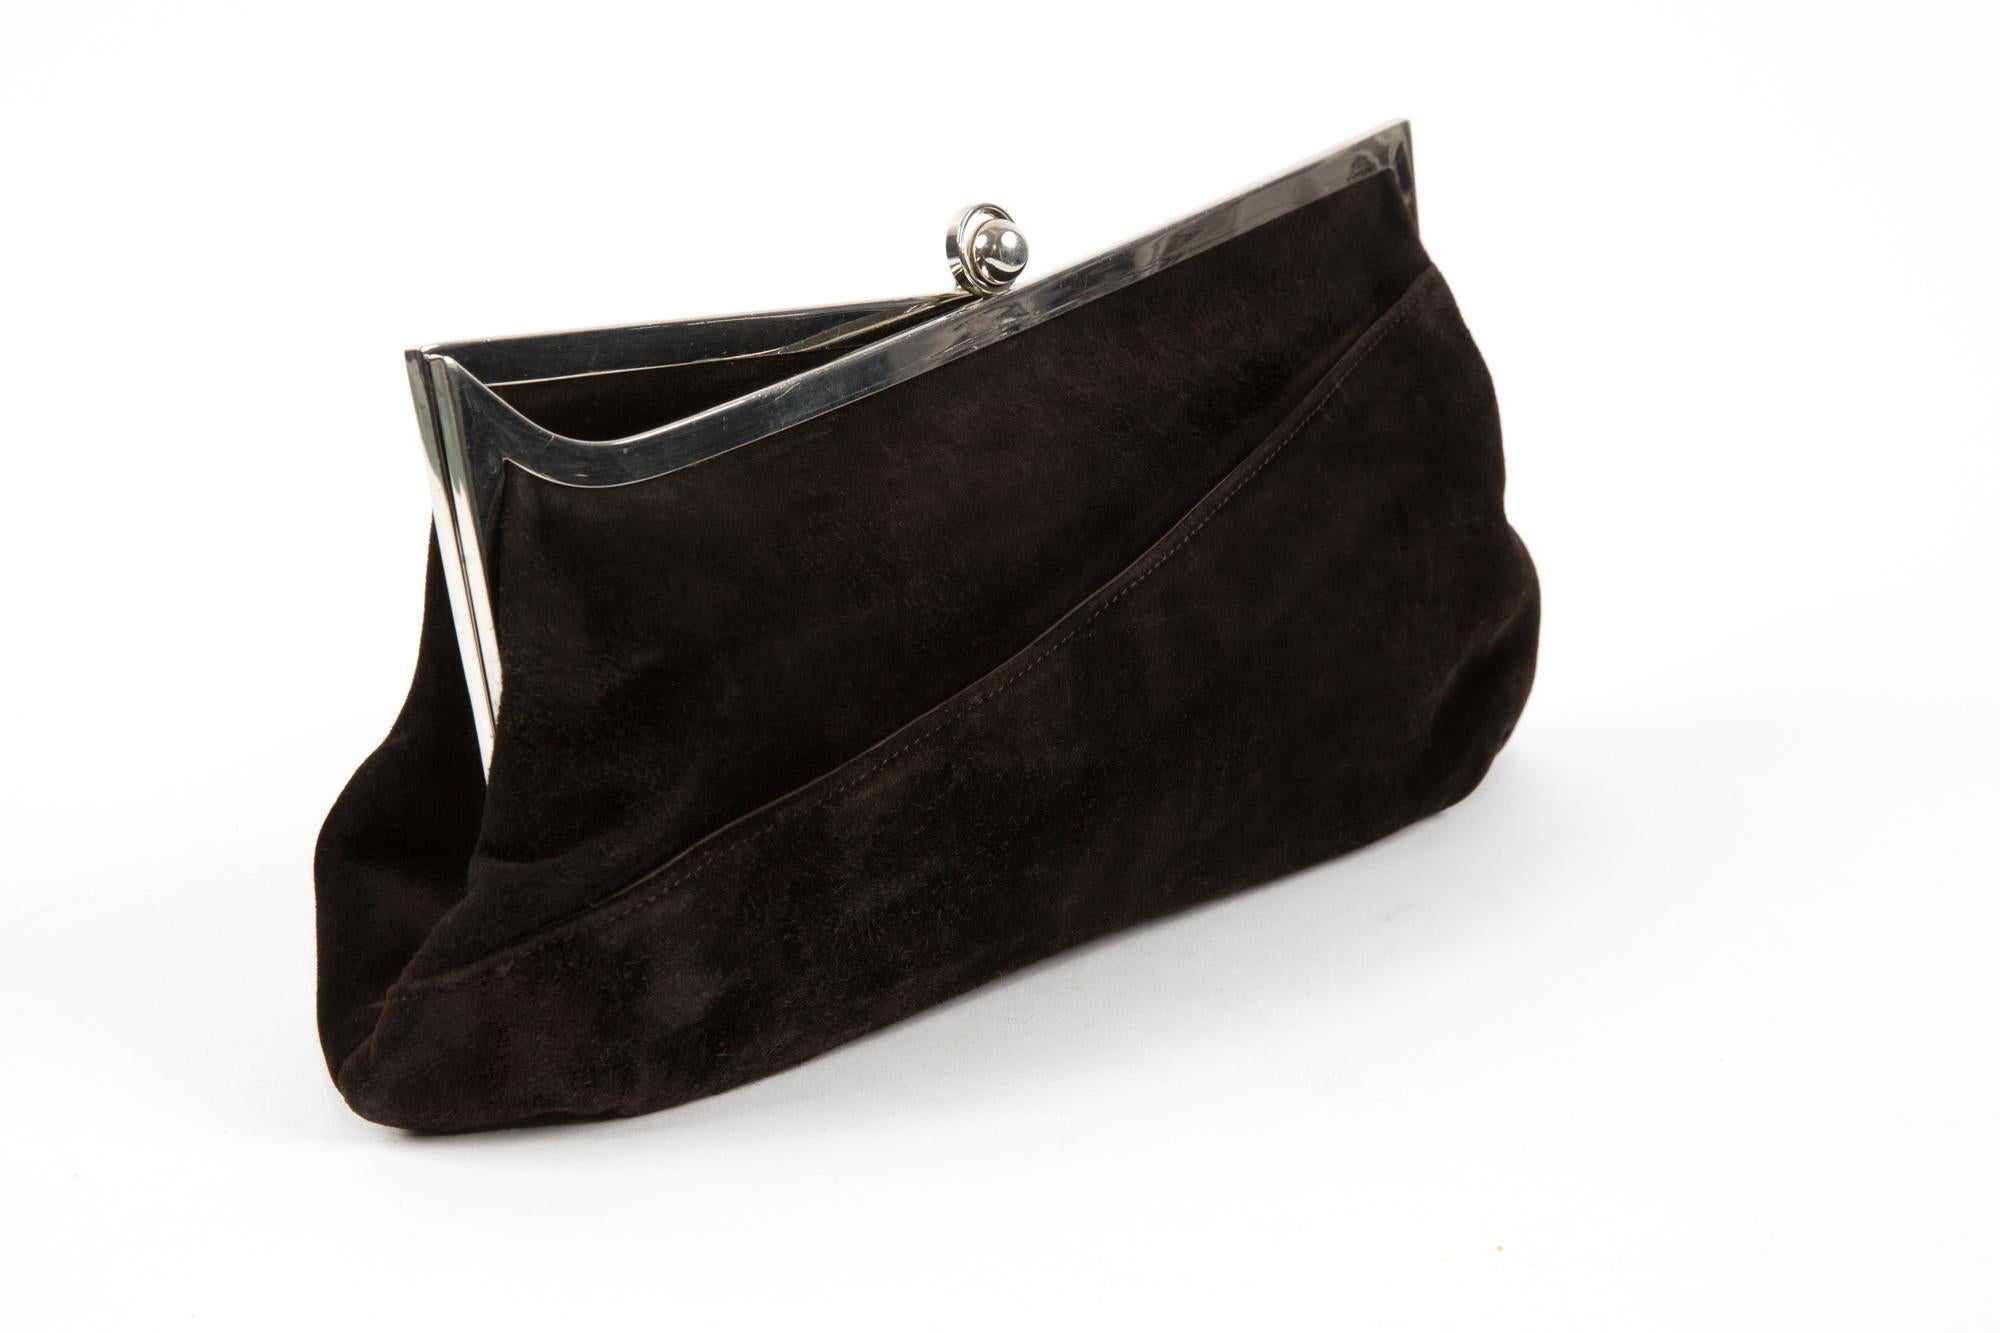 1960s Cesare Piccini brown suede leather clutchbag featuring silver-tone articulated metallic claps opening, an inside gold-tone stamp: Cesare Piccini Firenze. 
Circa 1960s
In good vintage condition. Made in Italy.
We guarantee you will receive this